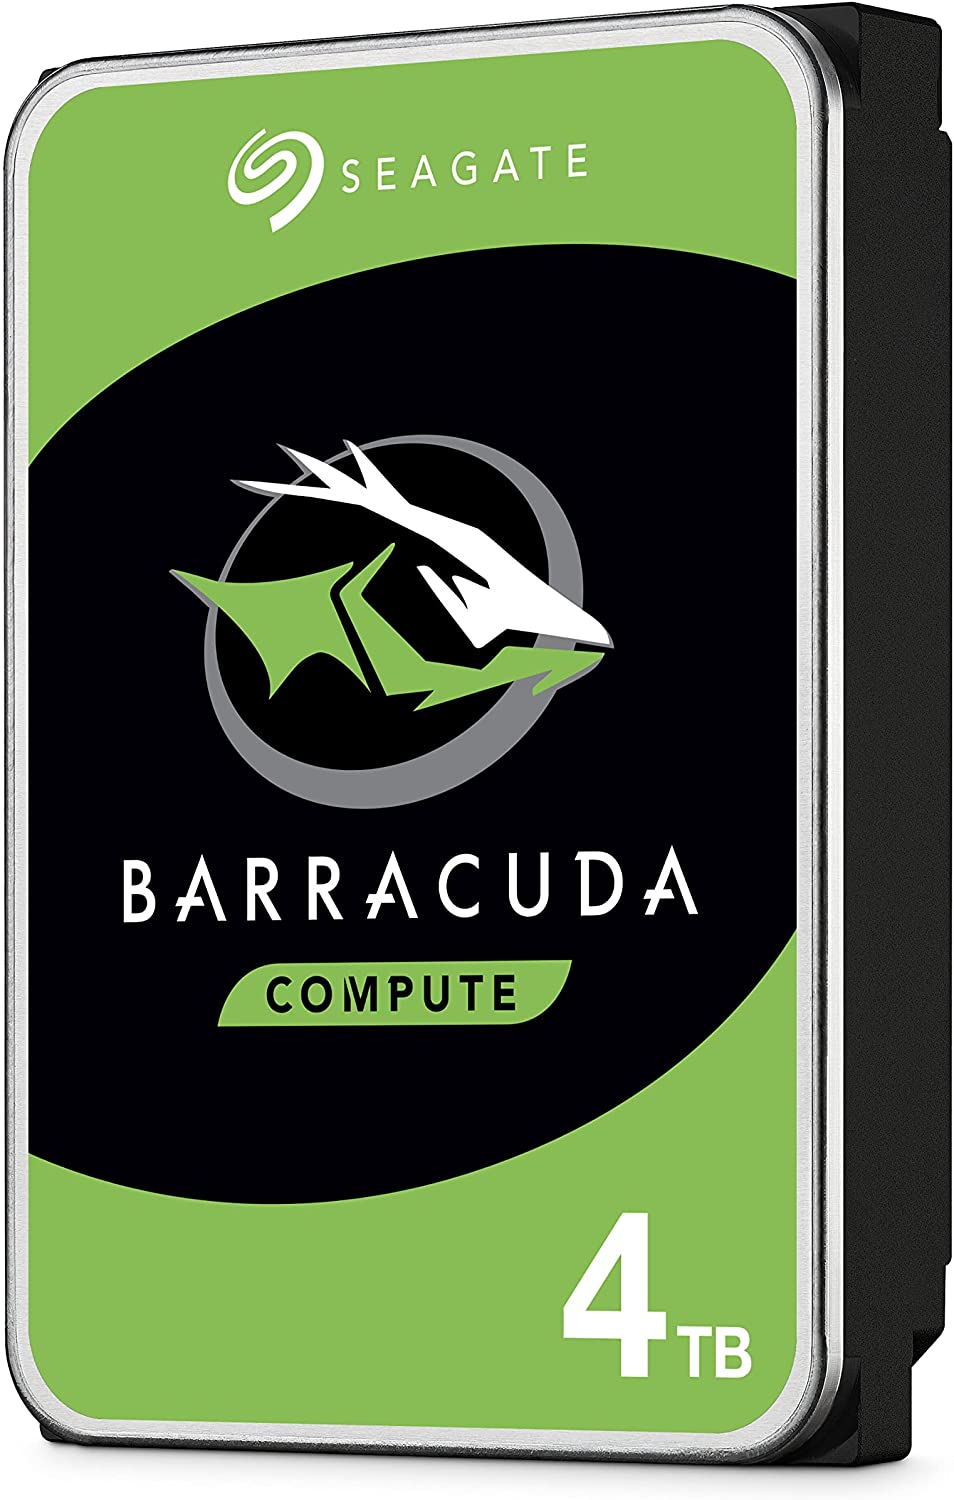 https://www.123consommables.com/public/uploads/images/uploaded_images/disque-dur-interne-seagate-barracuda-3-5-quot-sata-3-4-to-164925.jpg